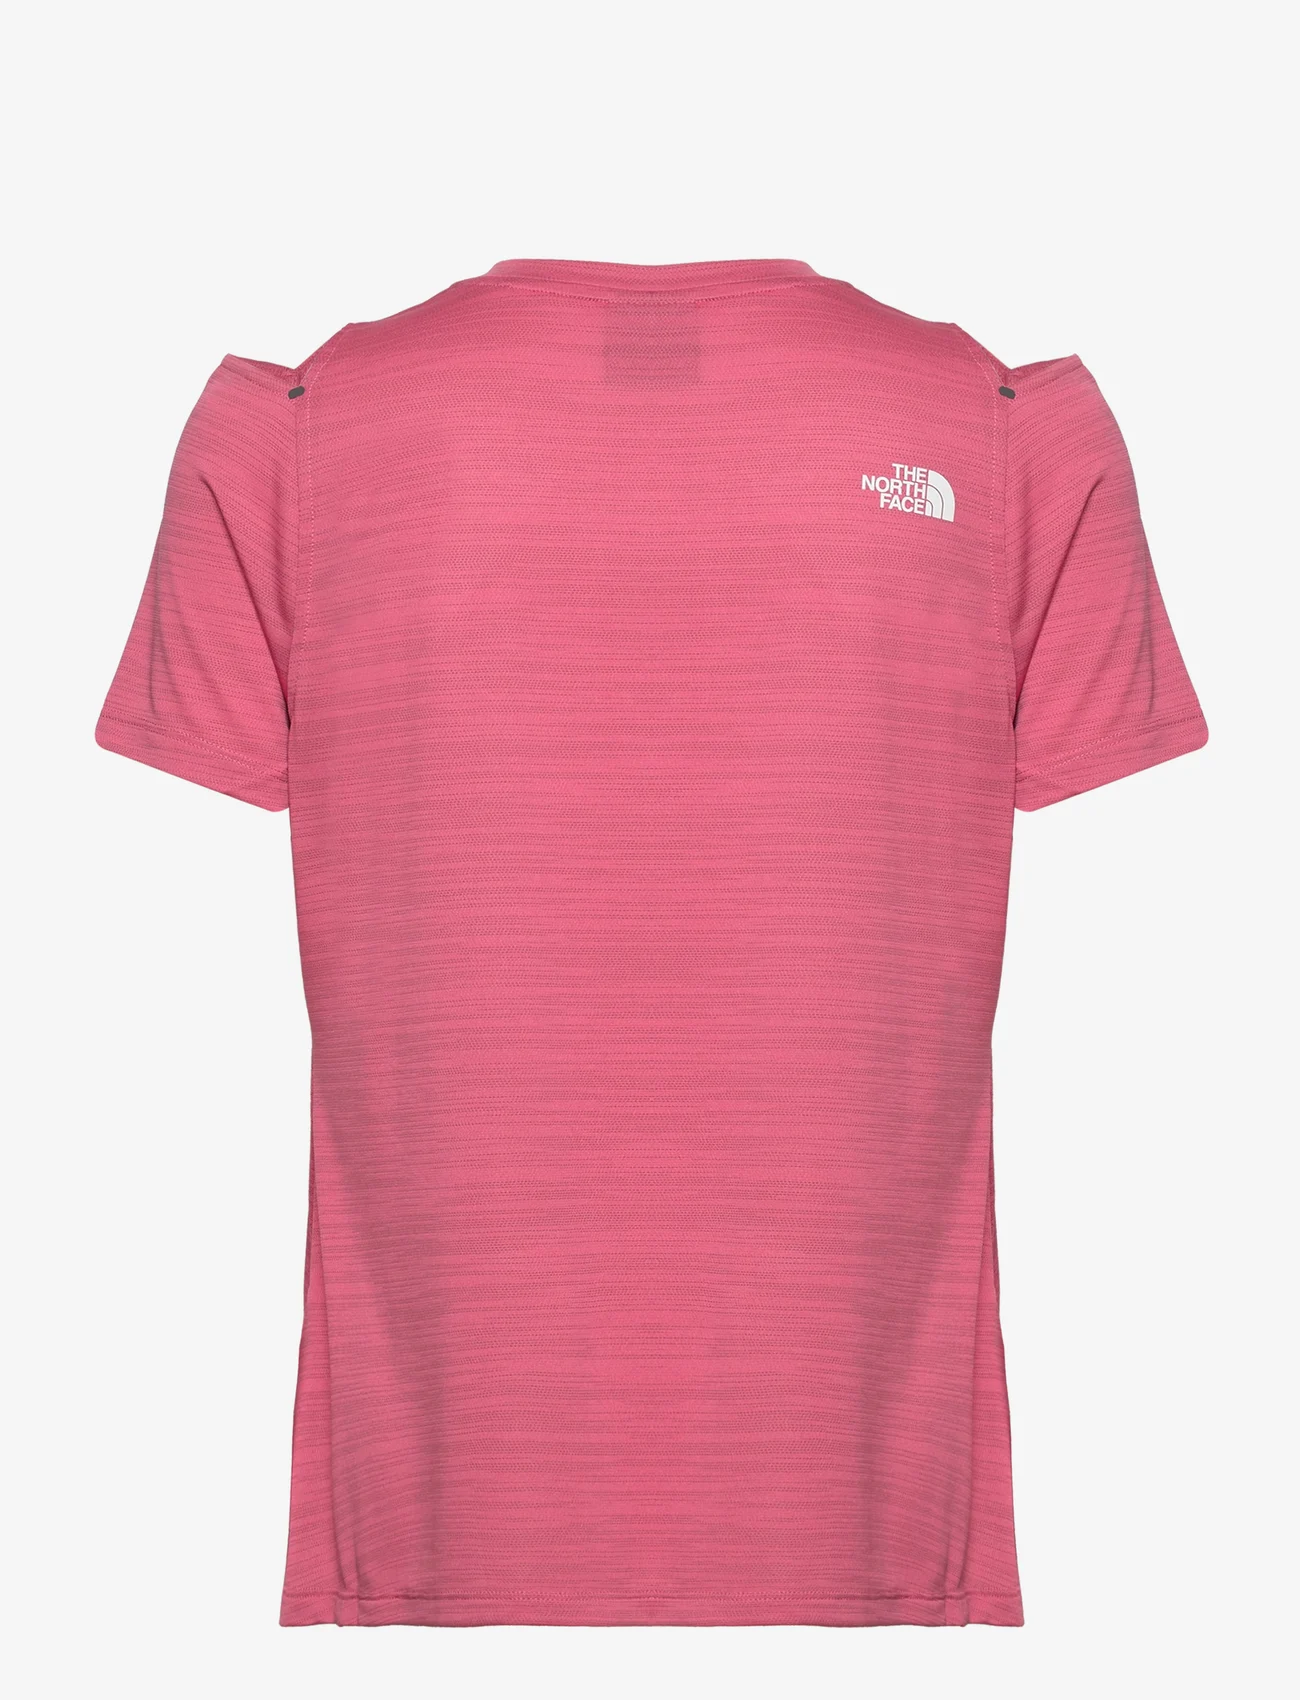 The North Face - W AO TEE - sport tops - cosmo pink/lunar slate - 1